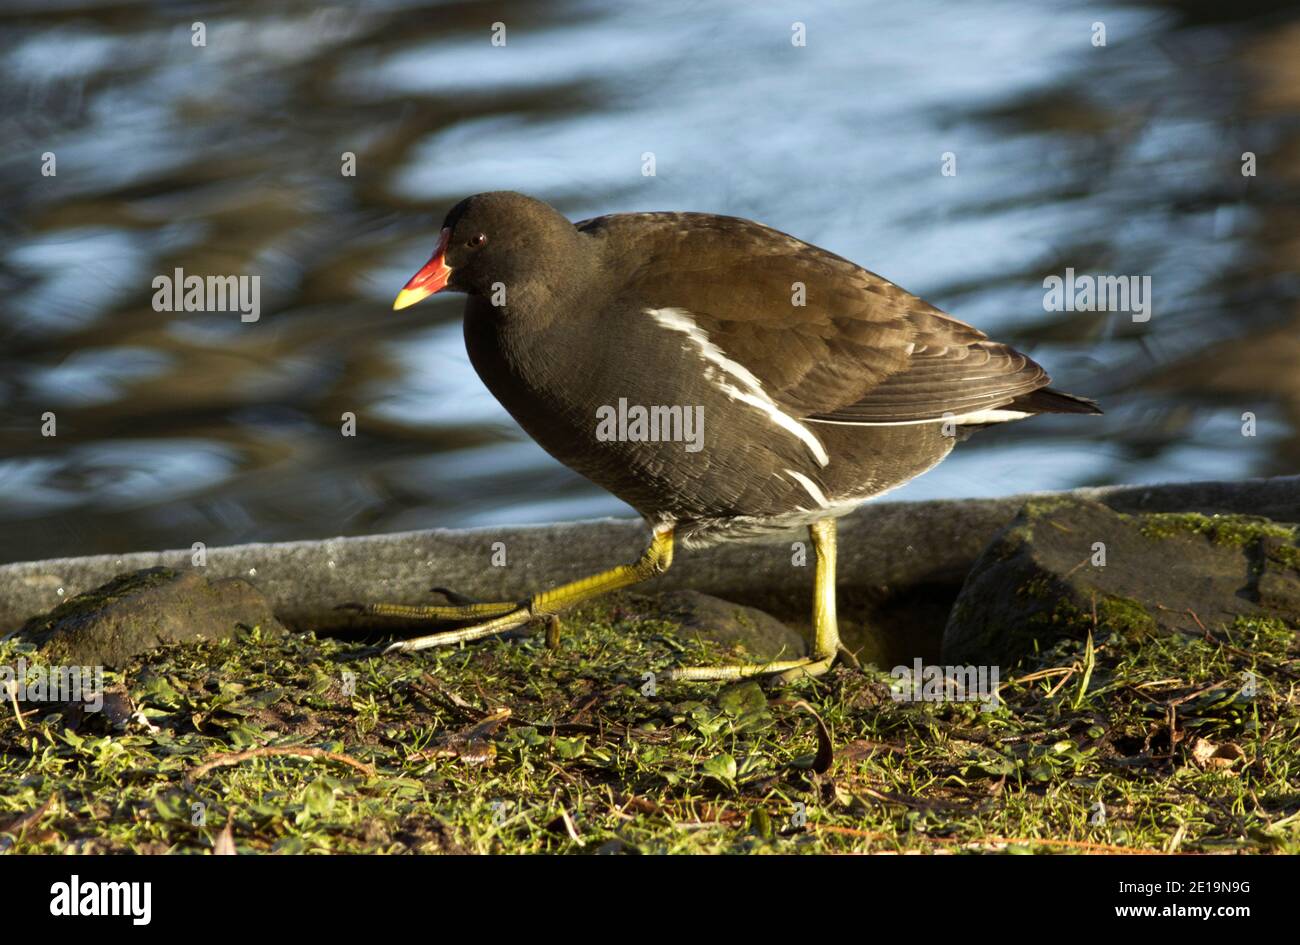 The Moorhen is a common site in towns and cities around Europe where they have adapted to ponds and lakes in municipal areas. Stock Photo